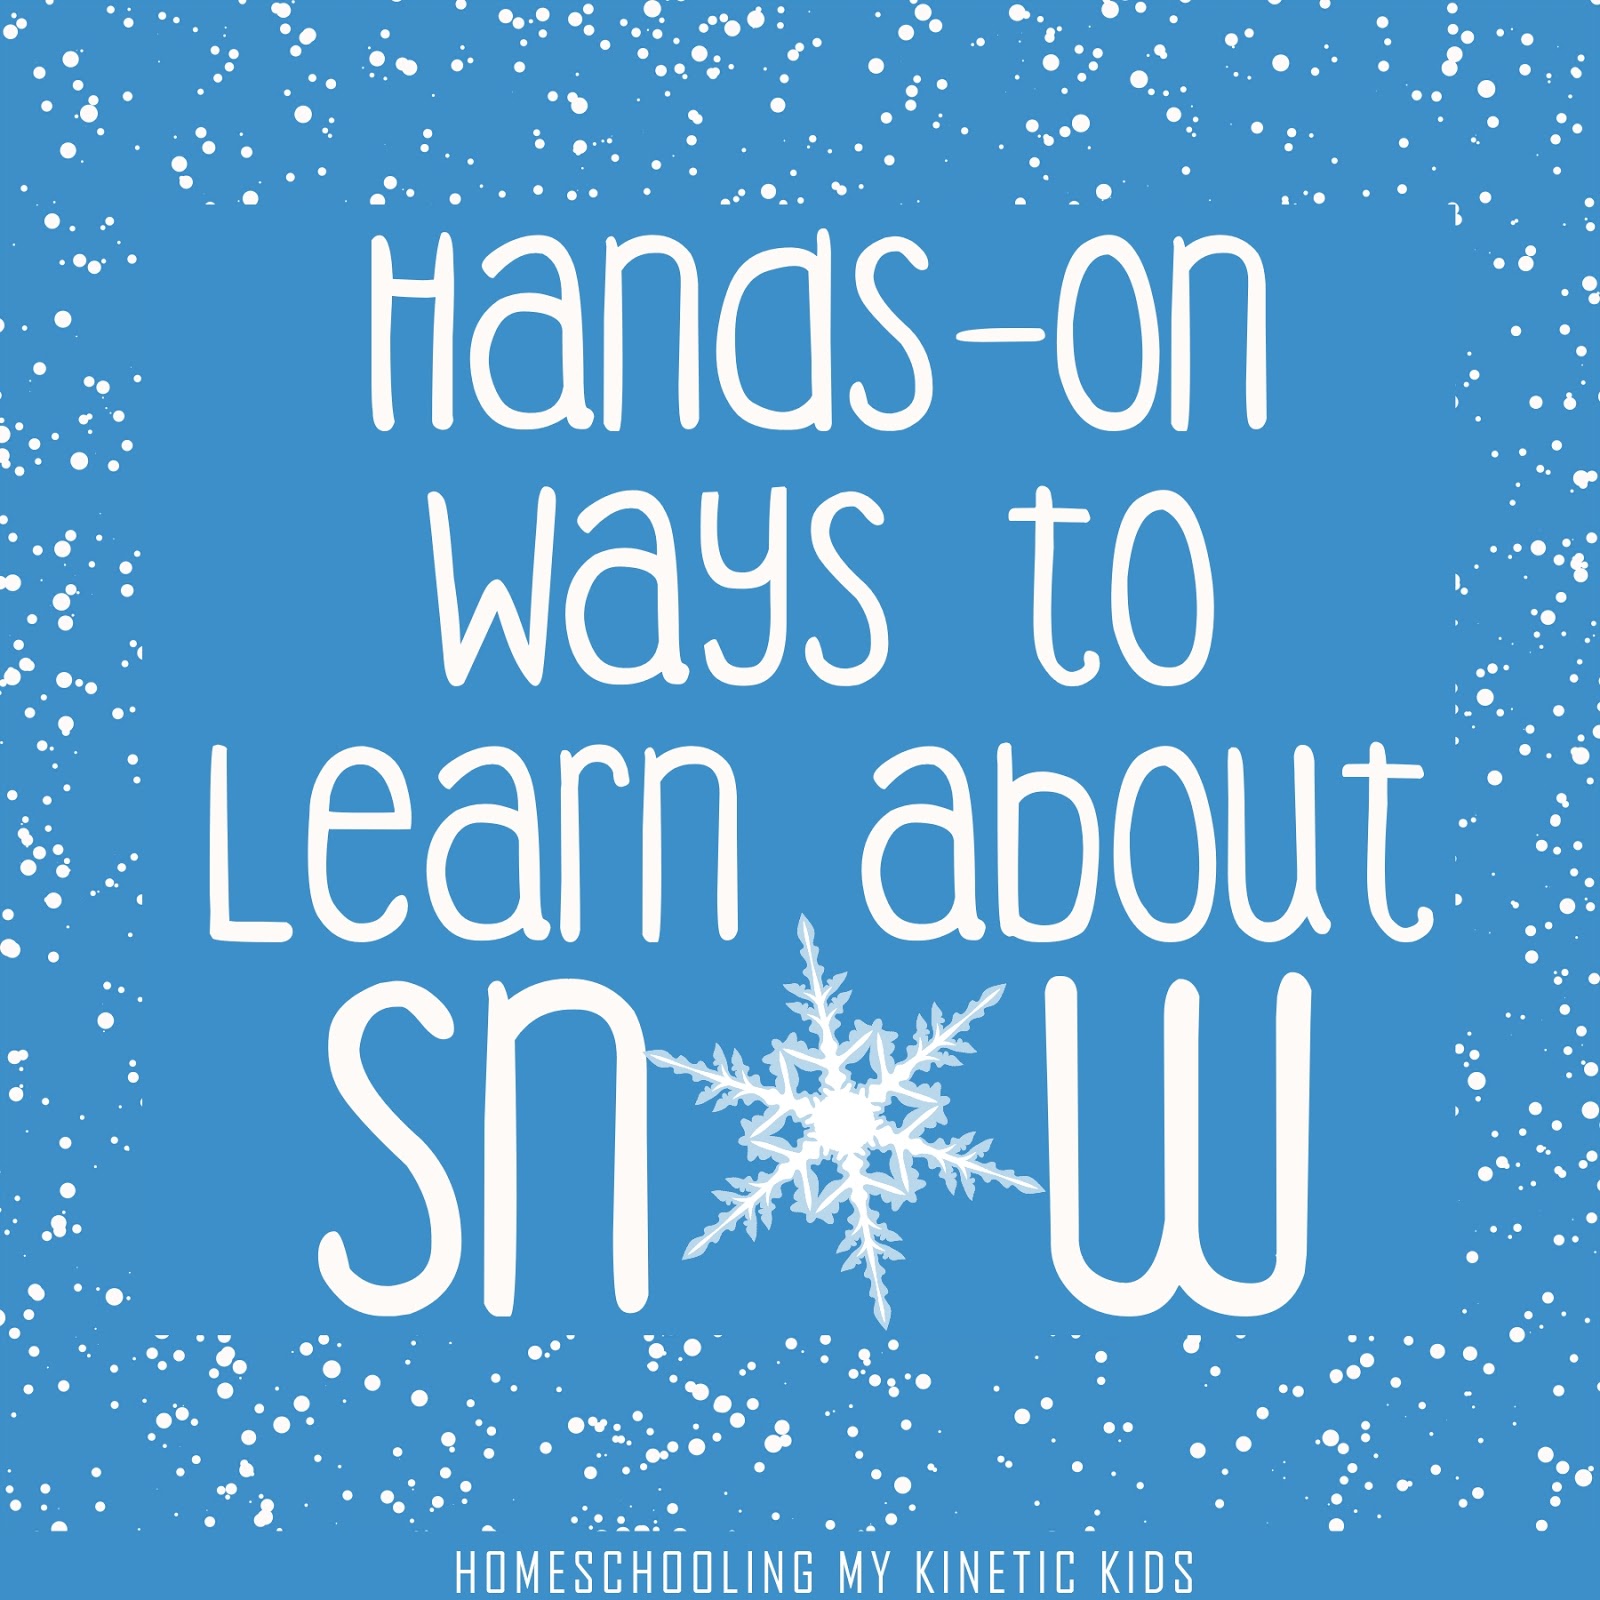 Hands-On STEM Ideas to Learn About Snow